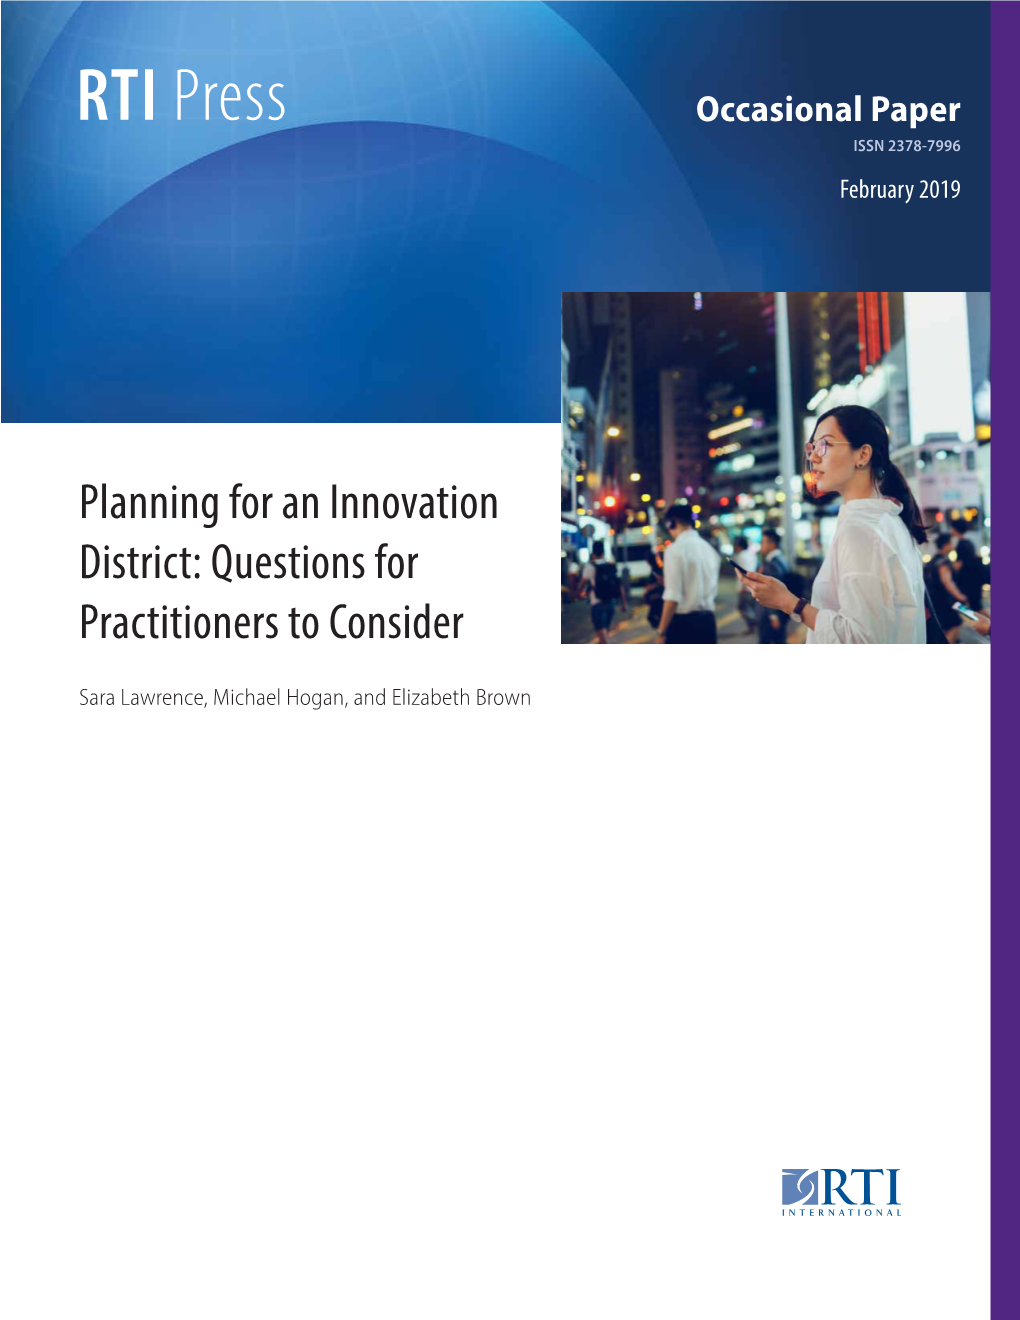 Planning for an Innovation District: Questions for Practitioners to Consider